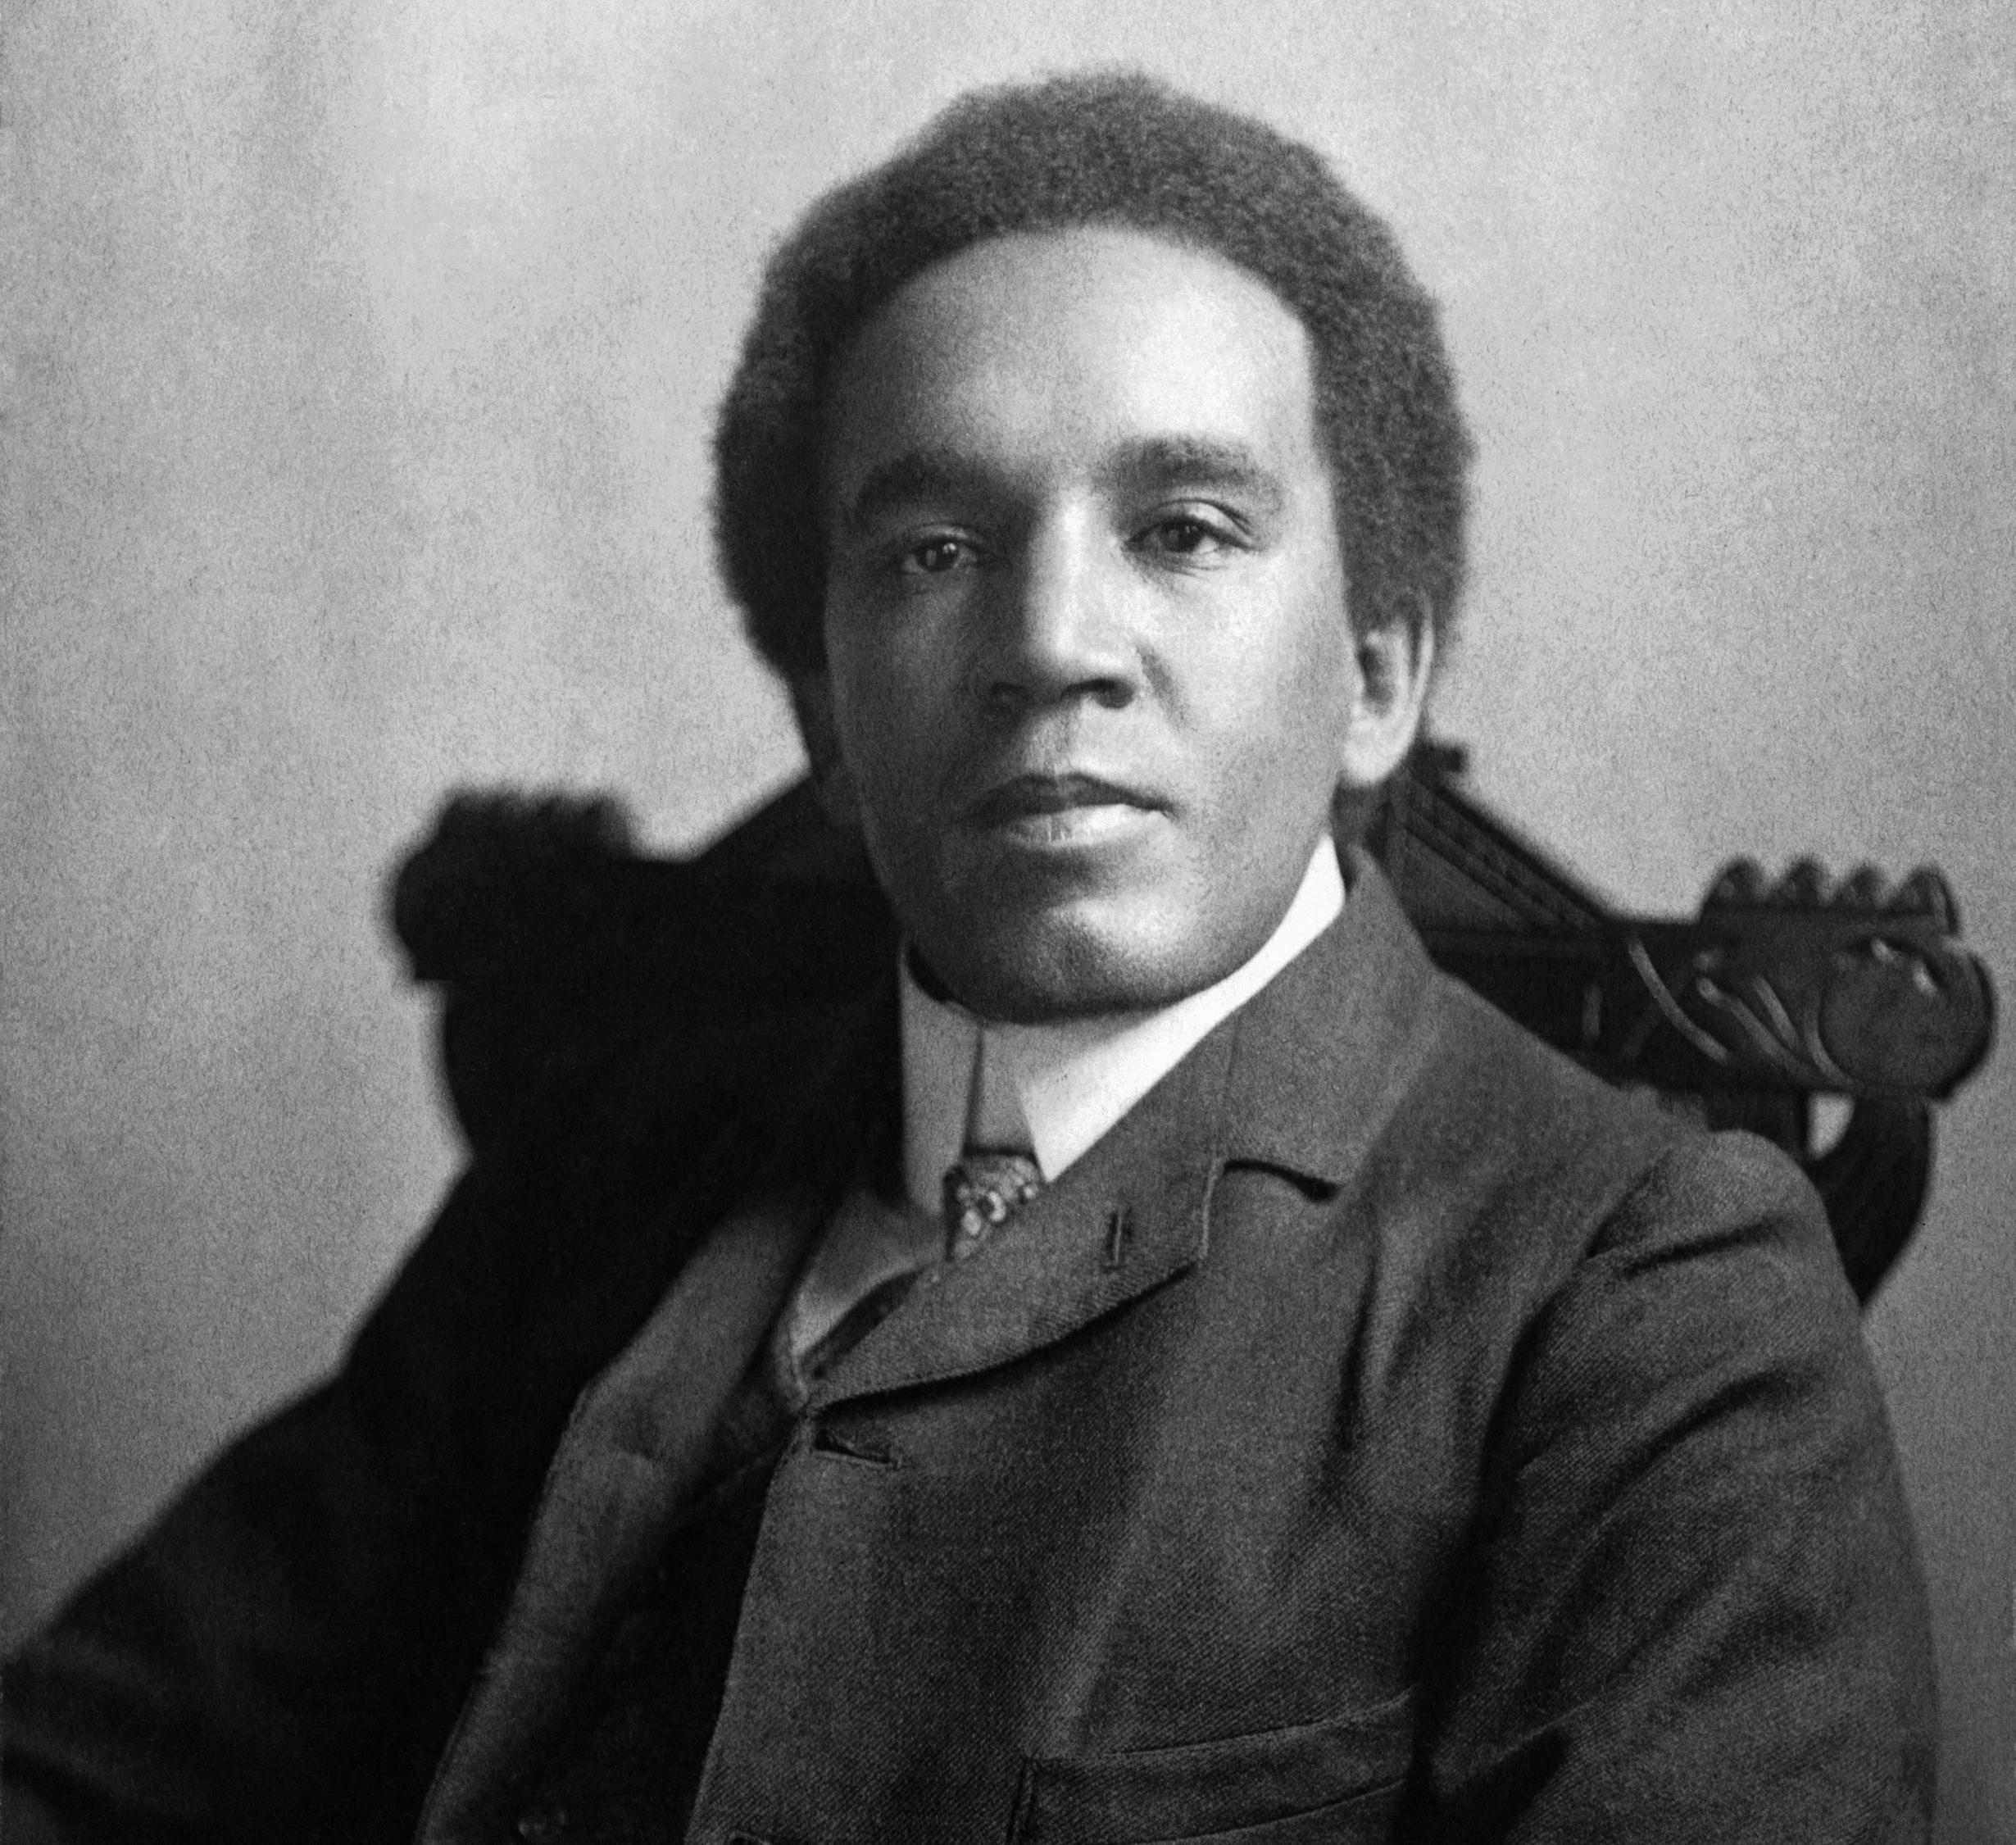 An old black and white photo of a Black man sitting in a chair, looking directly at the camera